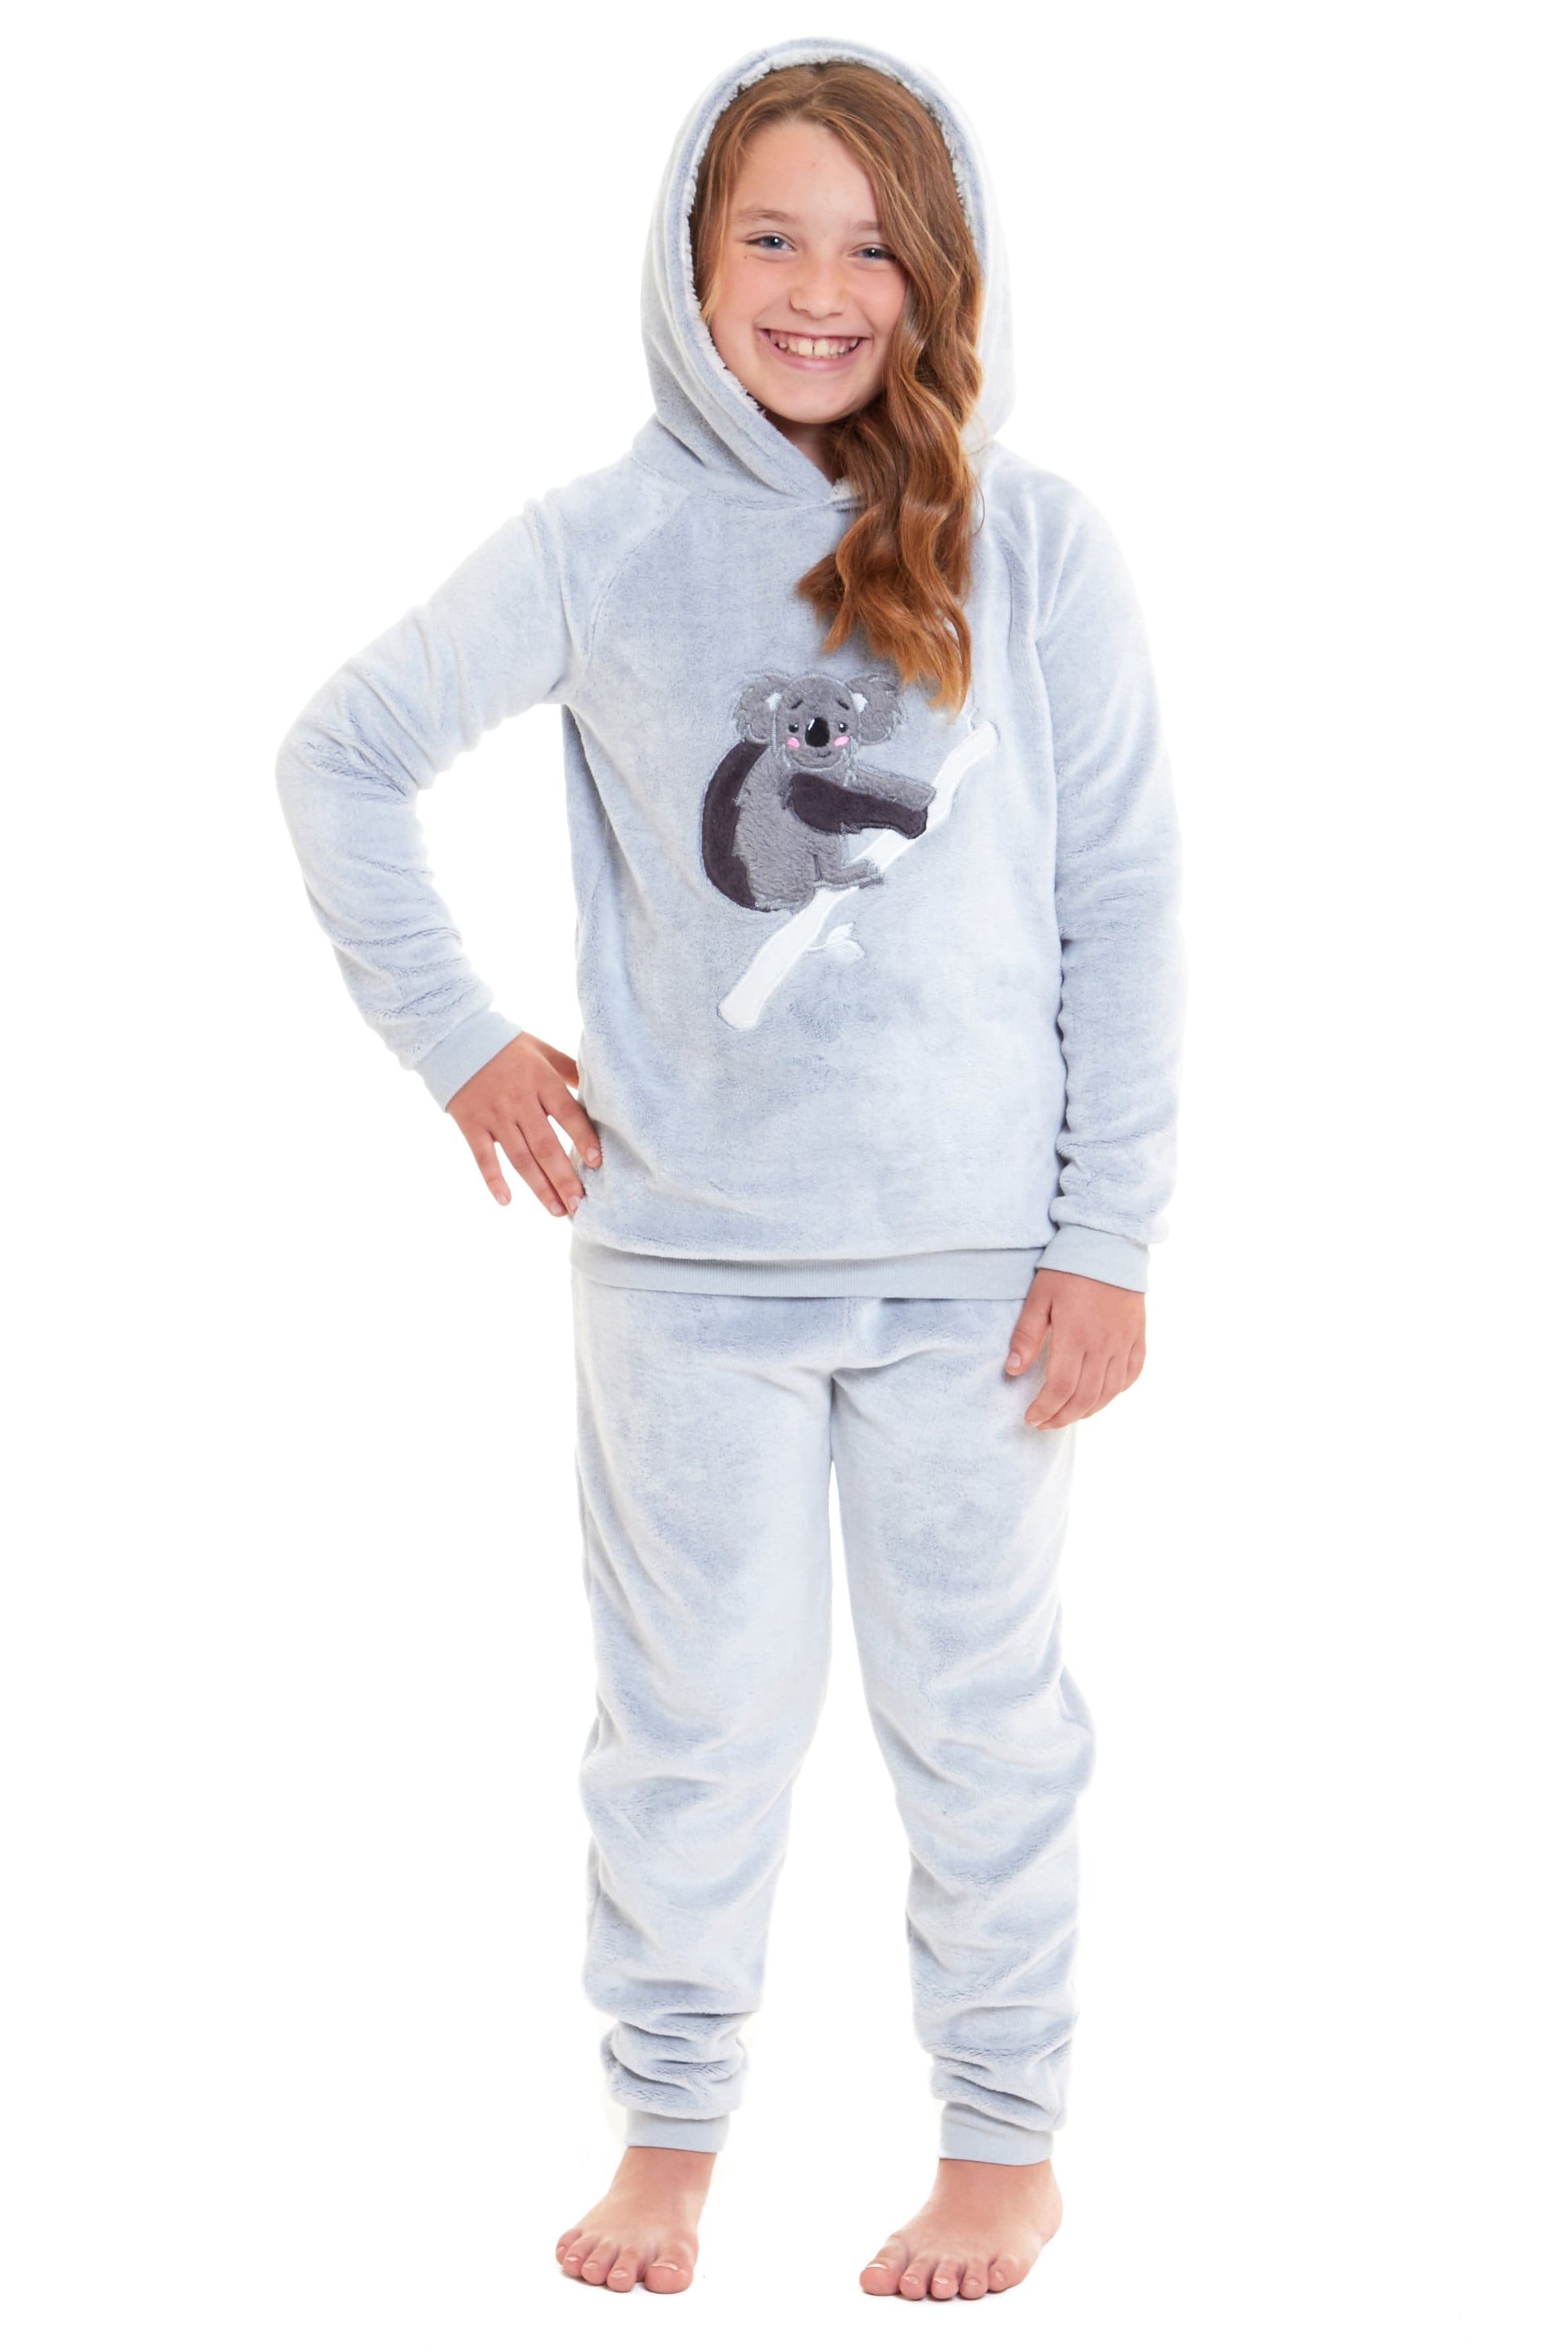 Cuddly Koala Bear Plush Fleece Hooded Pyjama Set By OLIVIA ROCCO, Soft &  Comfortable, Boutique Nightwear, Fluffy Loungewear, Cosy Everyday PJs, The  Perfect Mother & Daughter Gift Idea